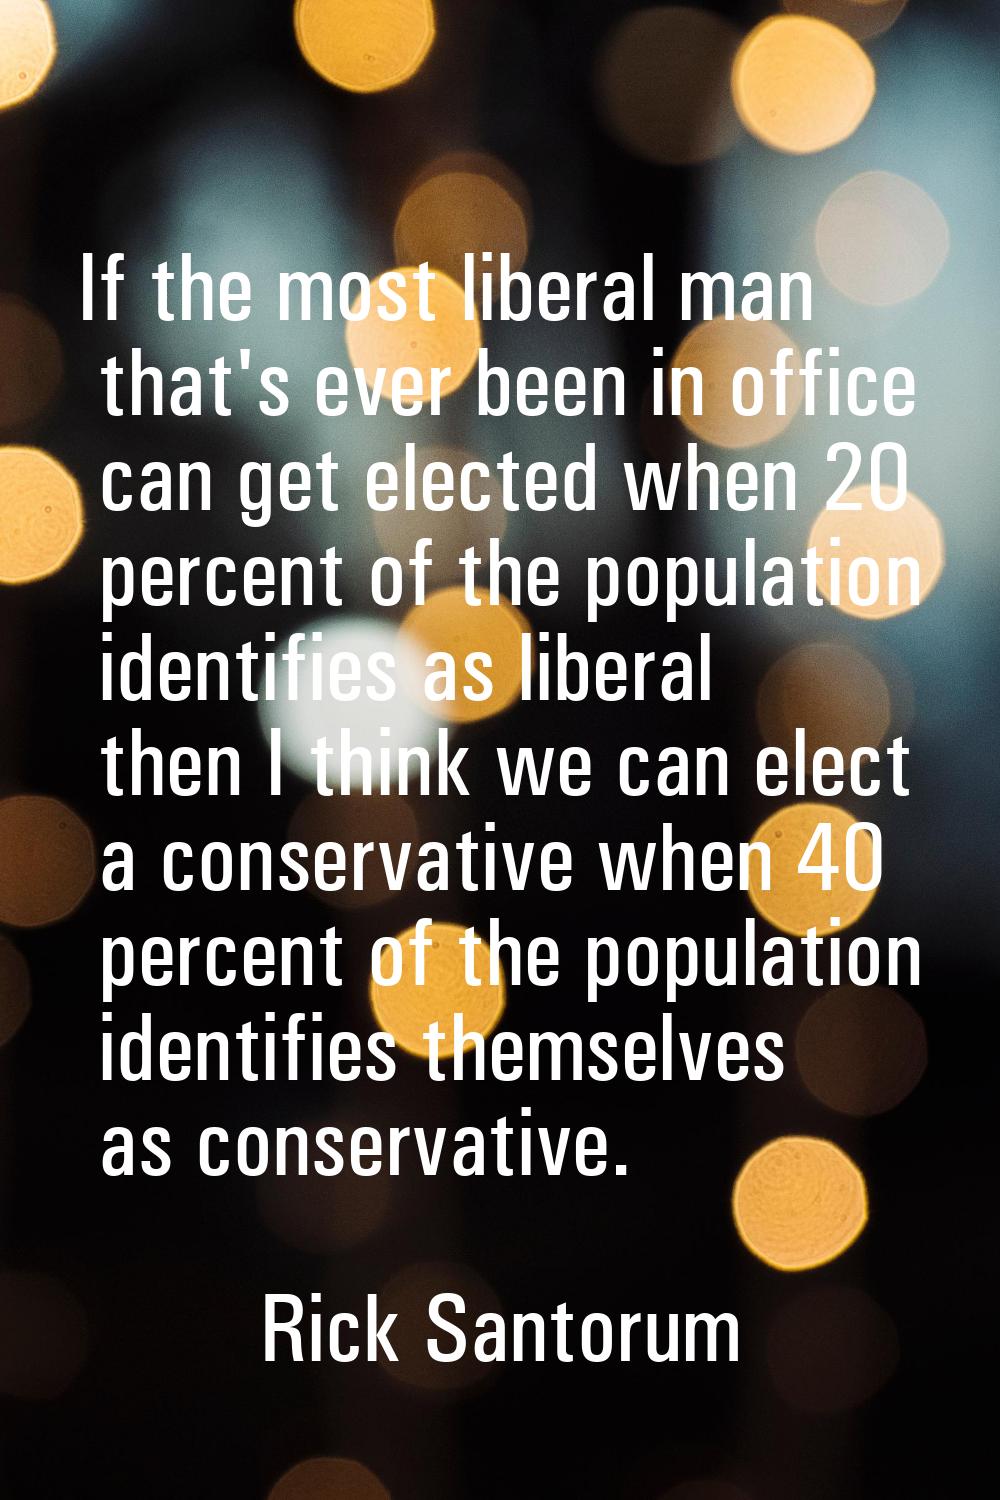 If the most liberal man that's ever been in office can get elected when 20 percent of the populatio